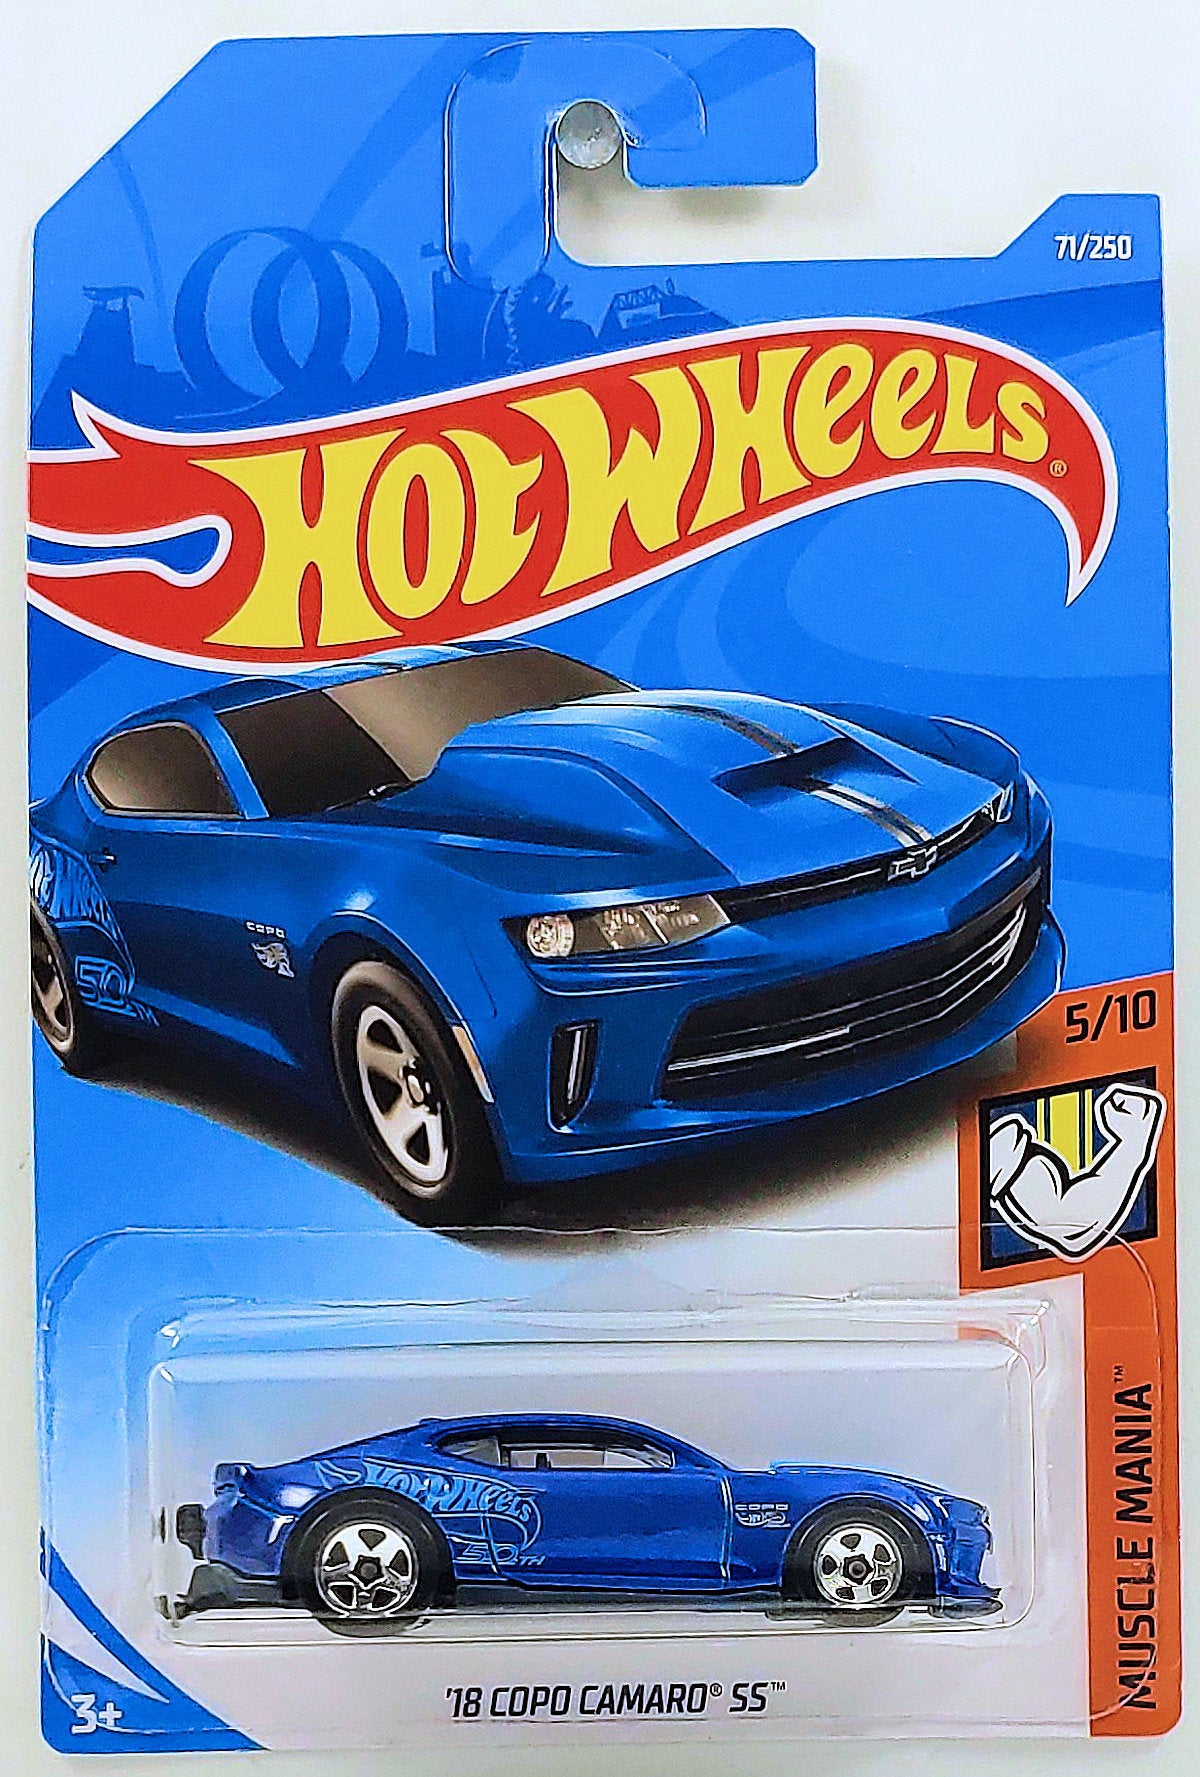 Hot Wheels 2019 - Collector # 071/250 - Muscle Mania 5/10 - '18 COPO Camaro SS - Blue - IC